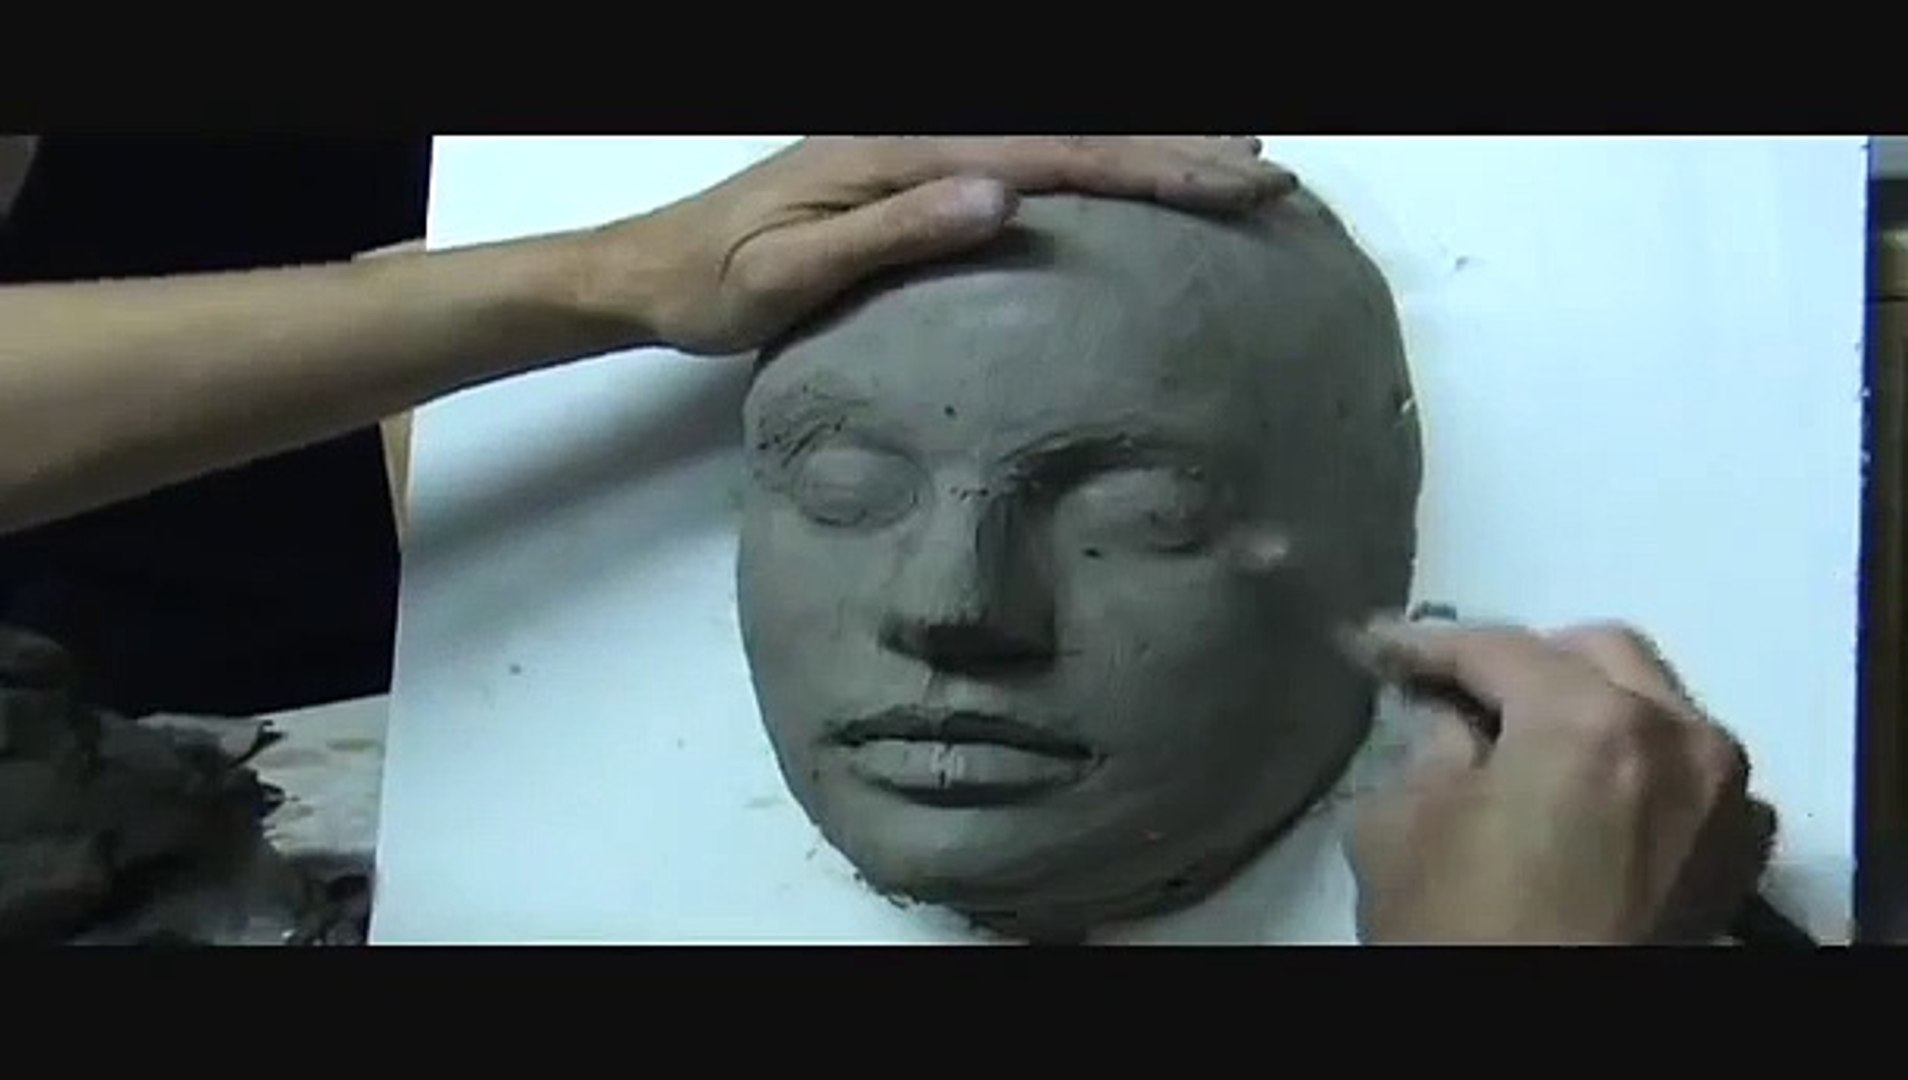 Sculpting a face in clay. Sculpting demo how to sculpt girl's face. - video  Dailymotion